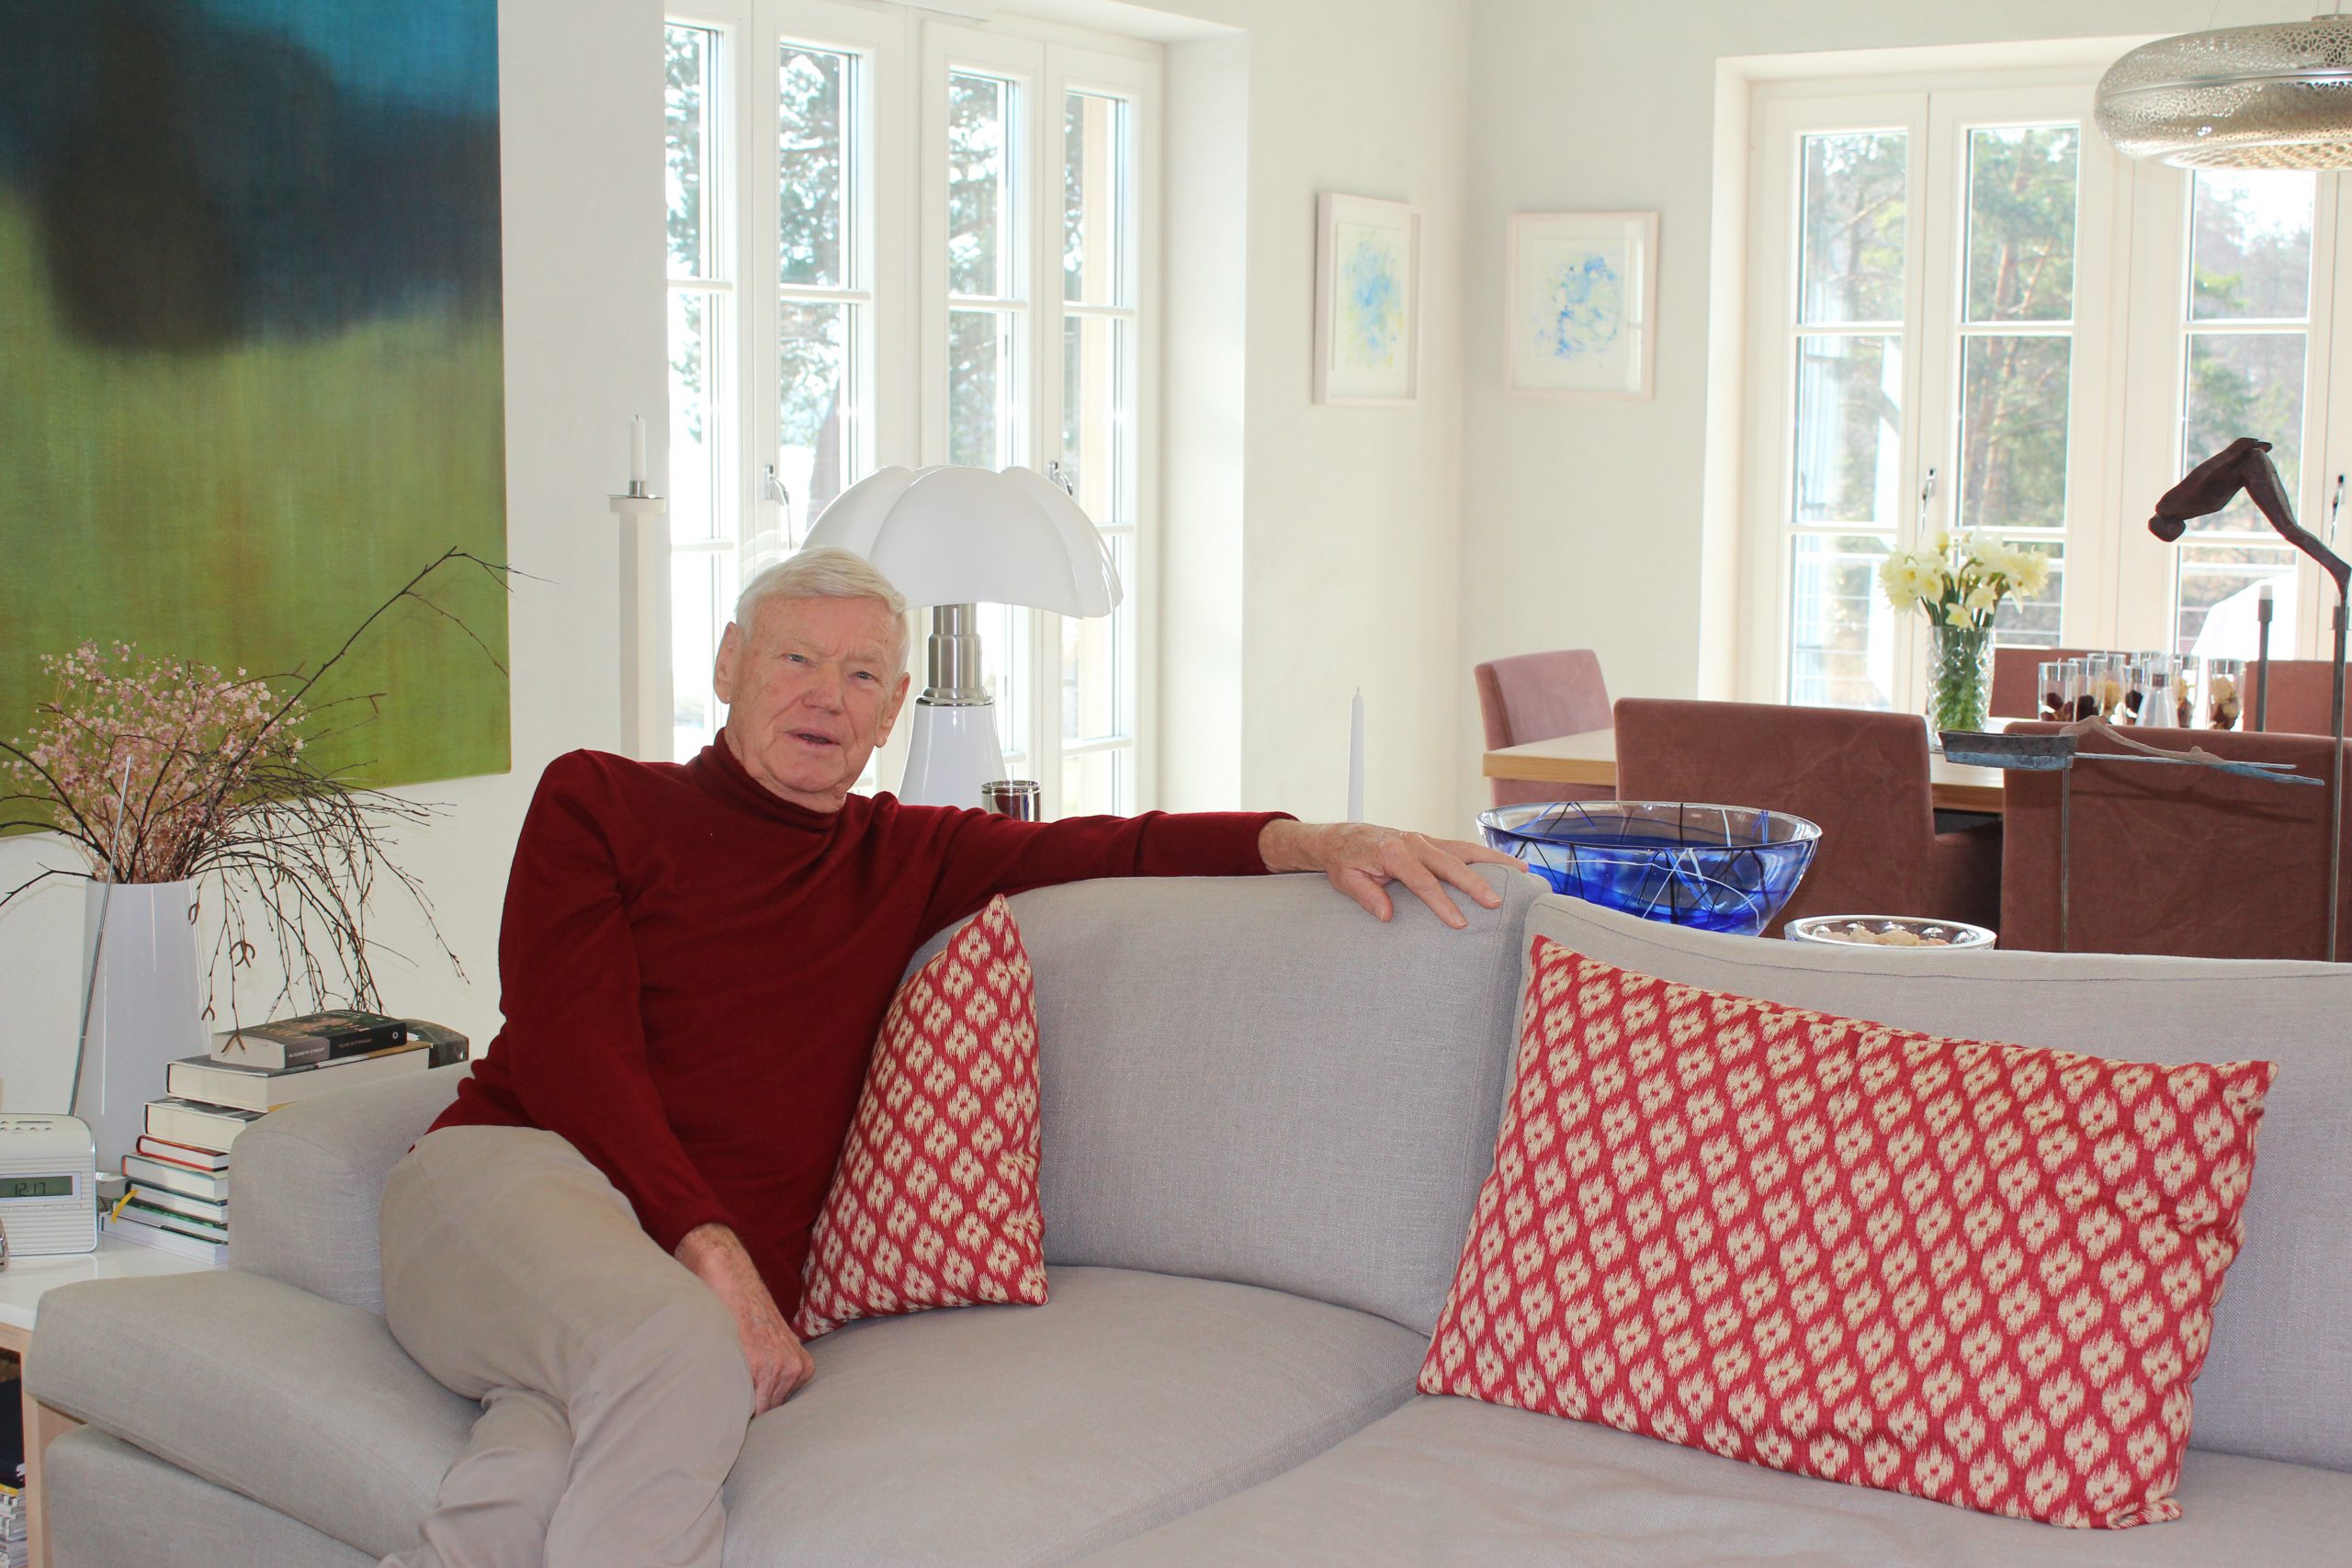 An older man sitting in a sofa in a scandinavian designed home with light colours